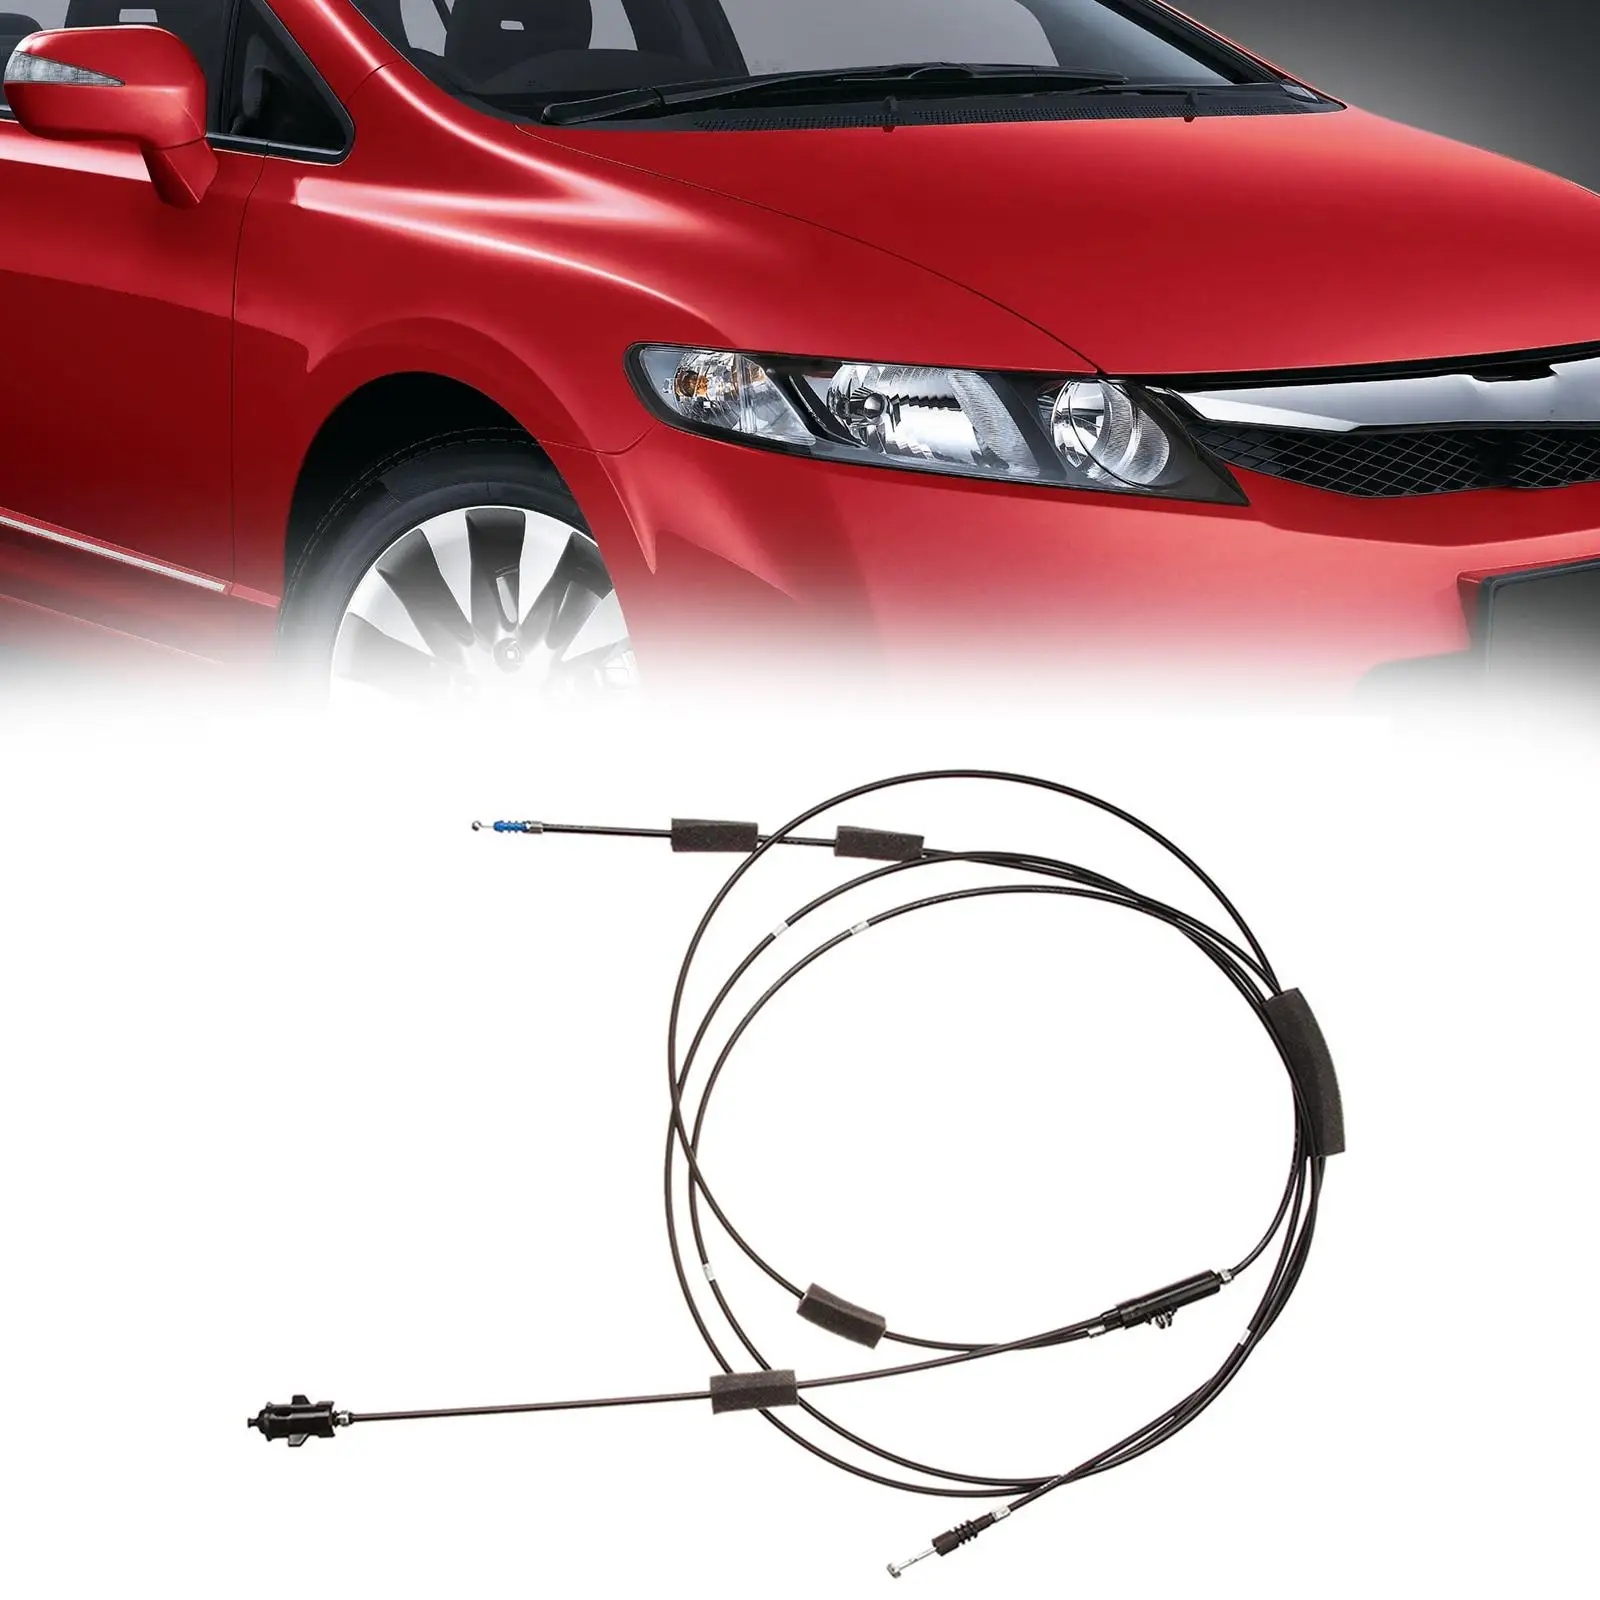 Trunk Lid Release Cable 74880 S5A 305 Replacements Assembly for Honda Civic 2001-2005 Vehicle Repair Parts Good Performance